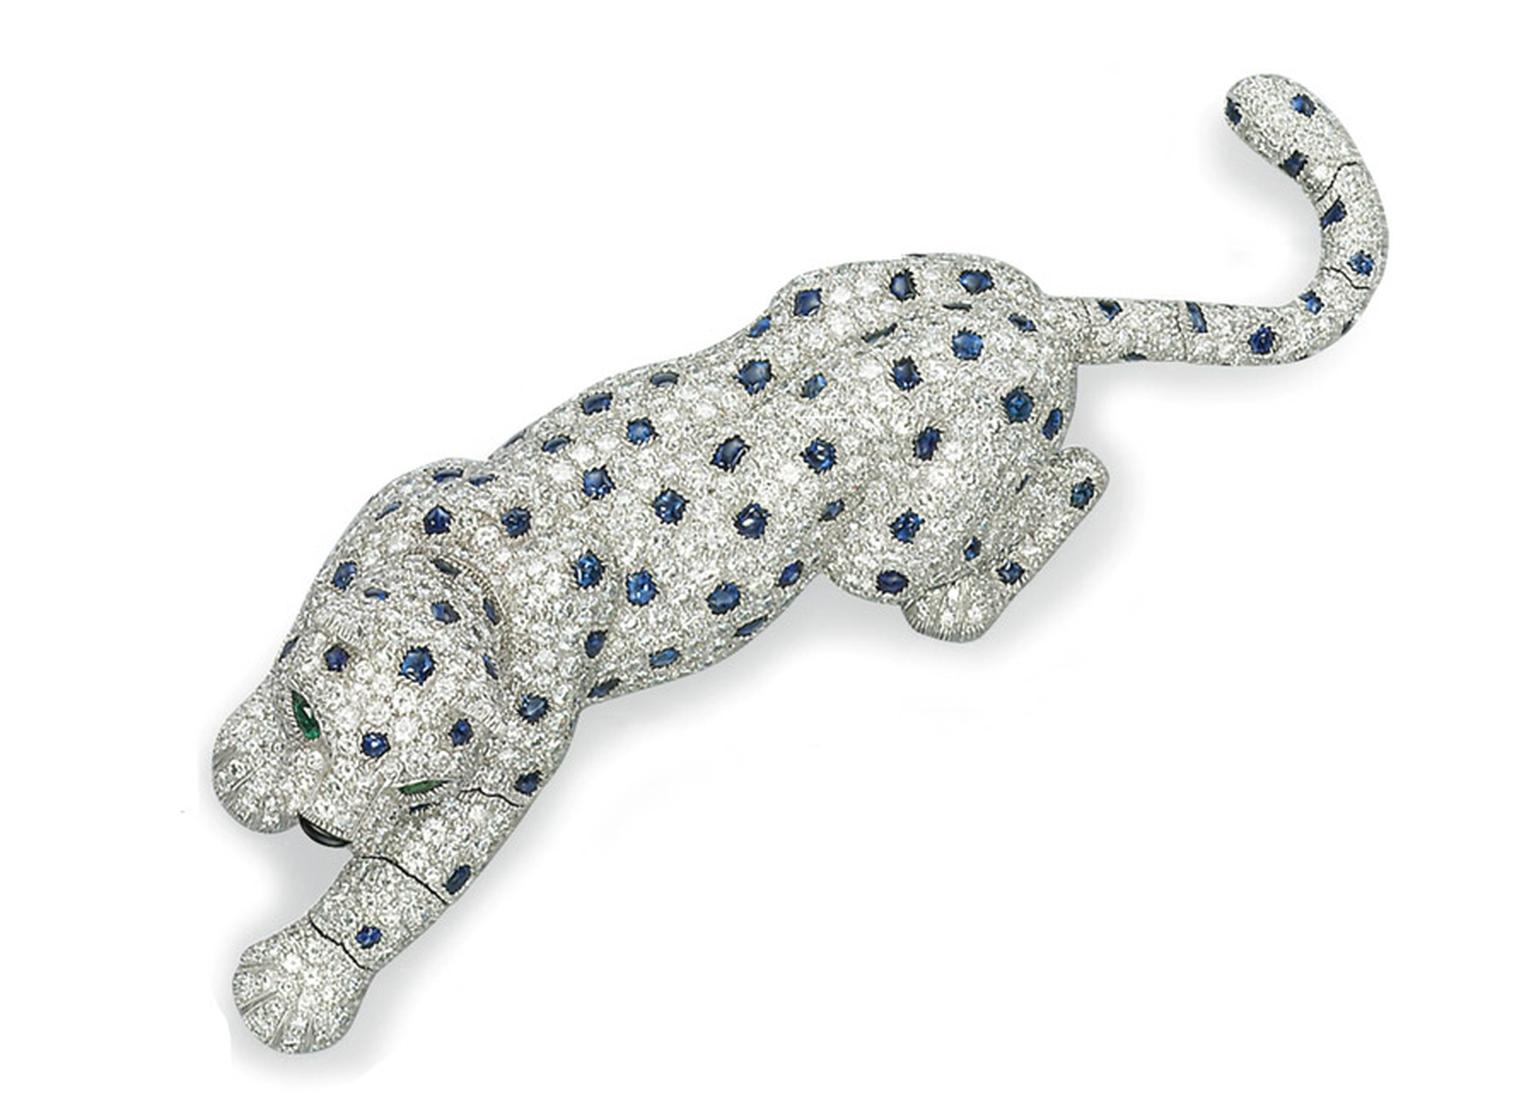 Christies-Lot-361-SAPPHIRE-DIAMOND-EMERALD-AND-ENAMEL-PANTHER-BROOCH-BY-CARTIER